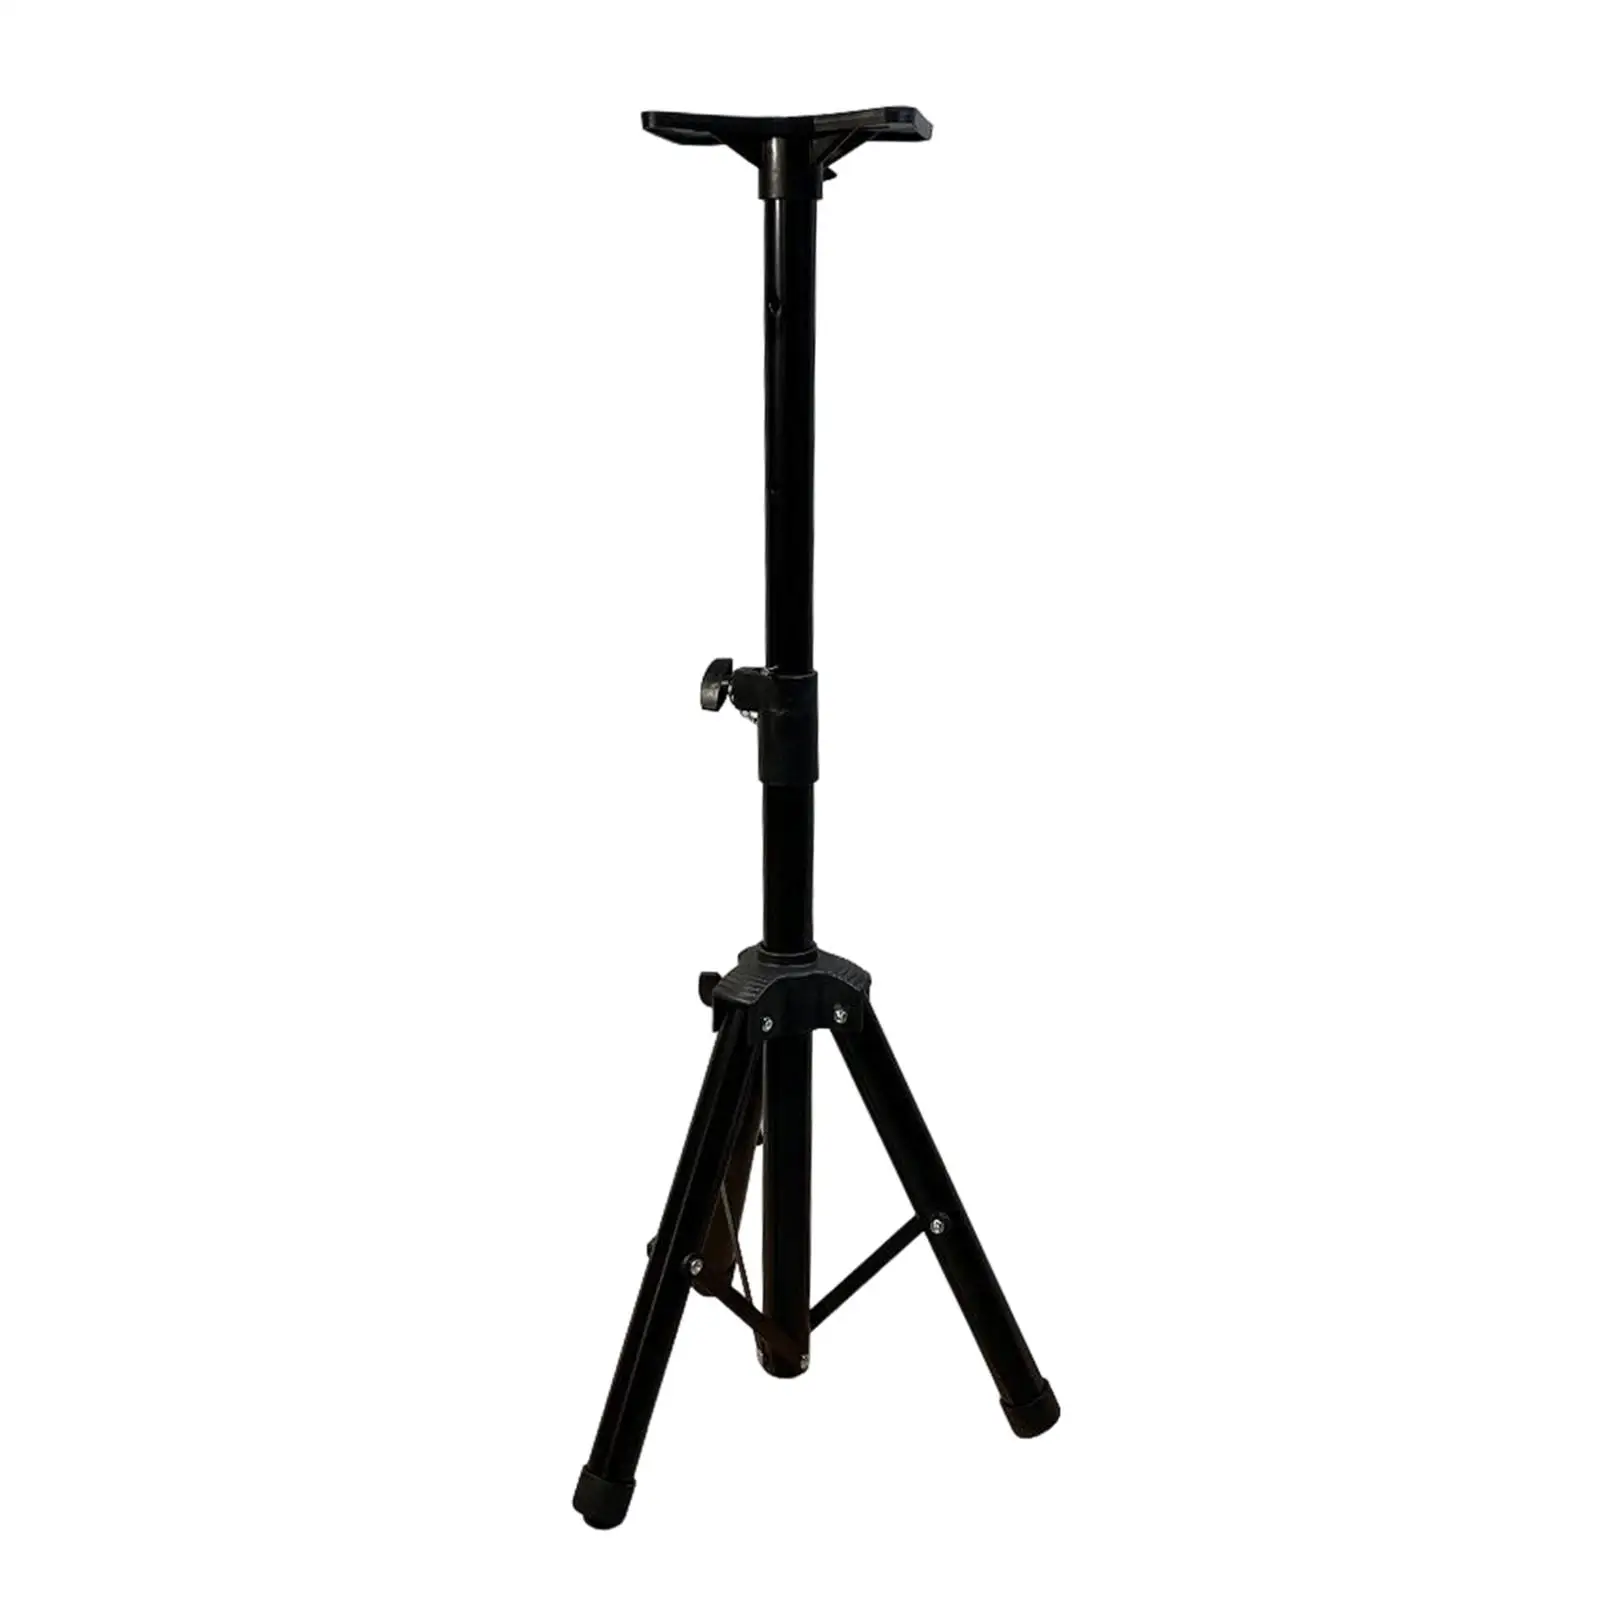 Target Stand Easy to Install Plastic 115cm, 98cm,85cm,78cm for Outdoor